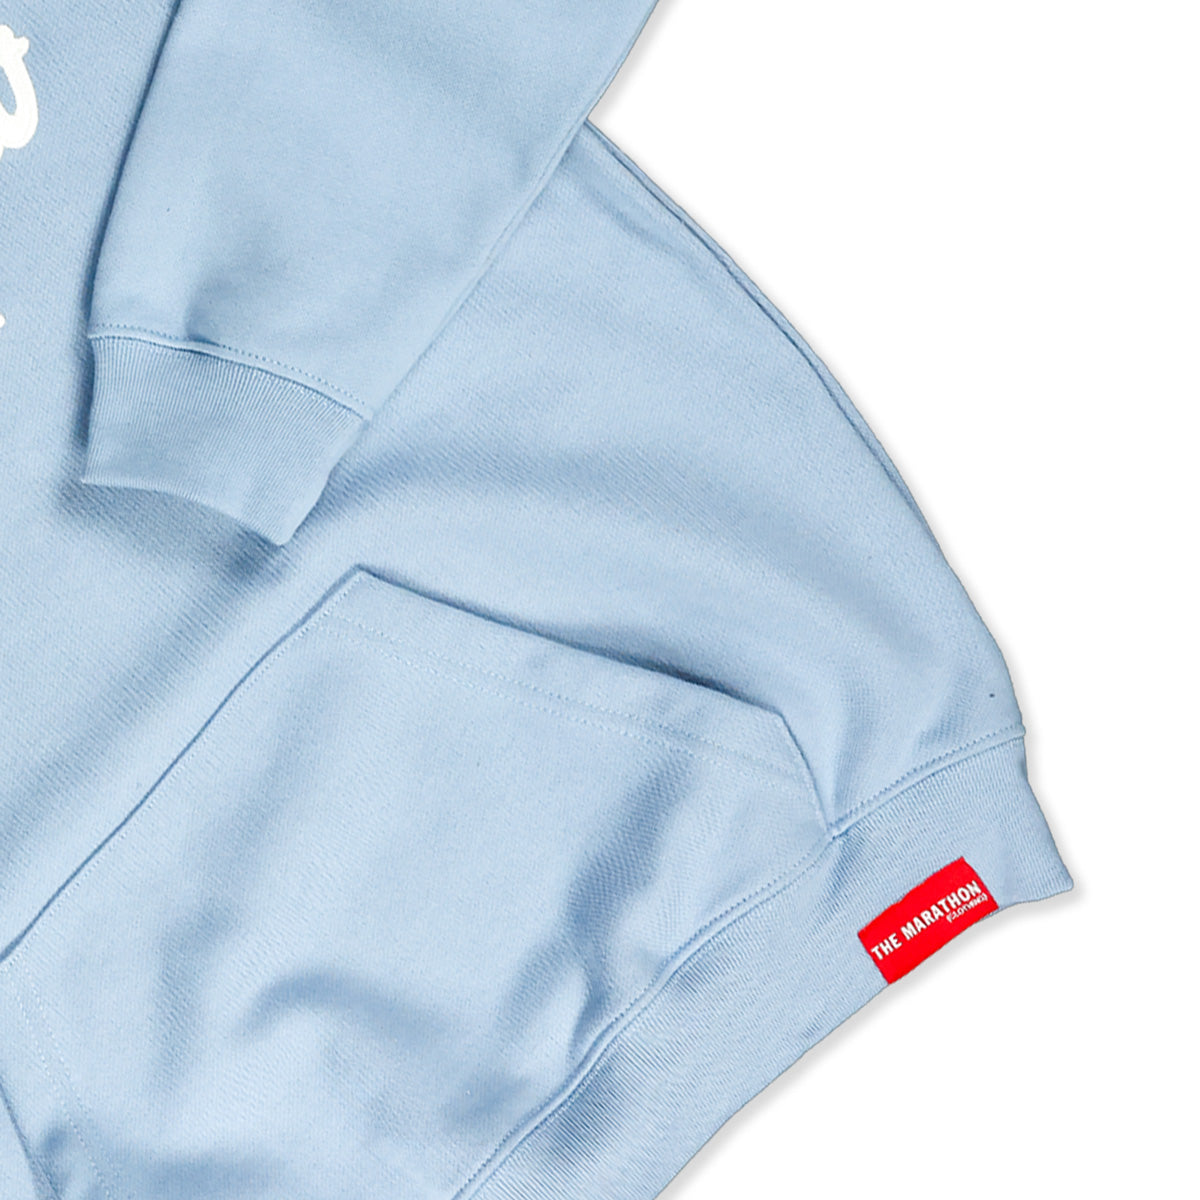 Limited Edition Ultra Crenshaw Hoodie - Light Blue/White - Detail 2